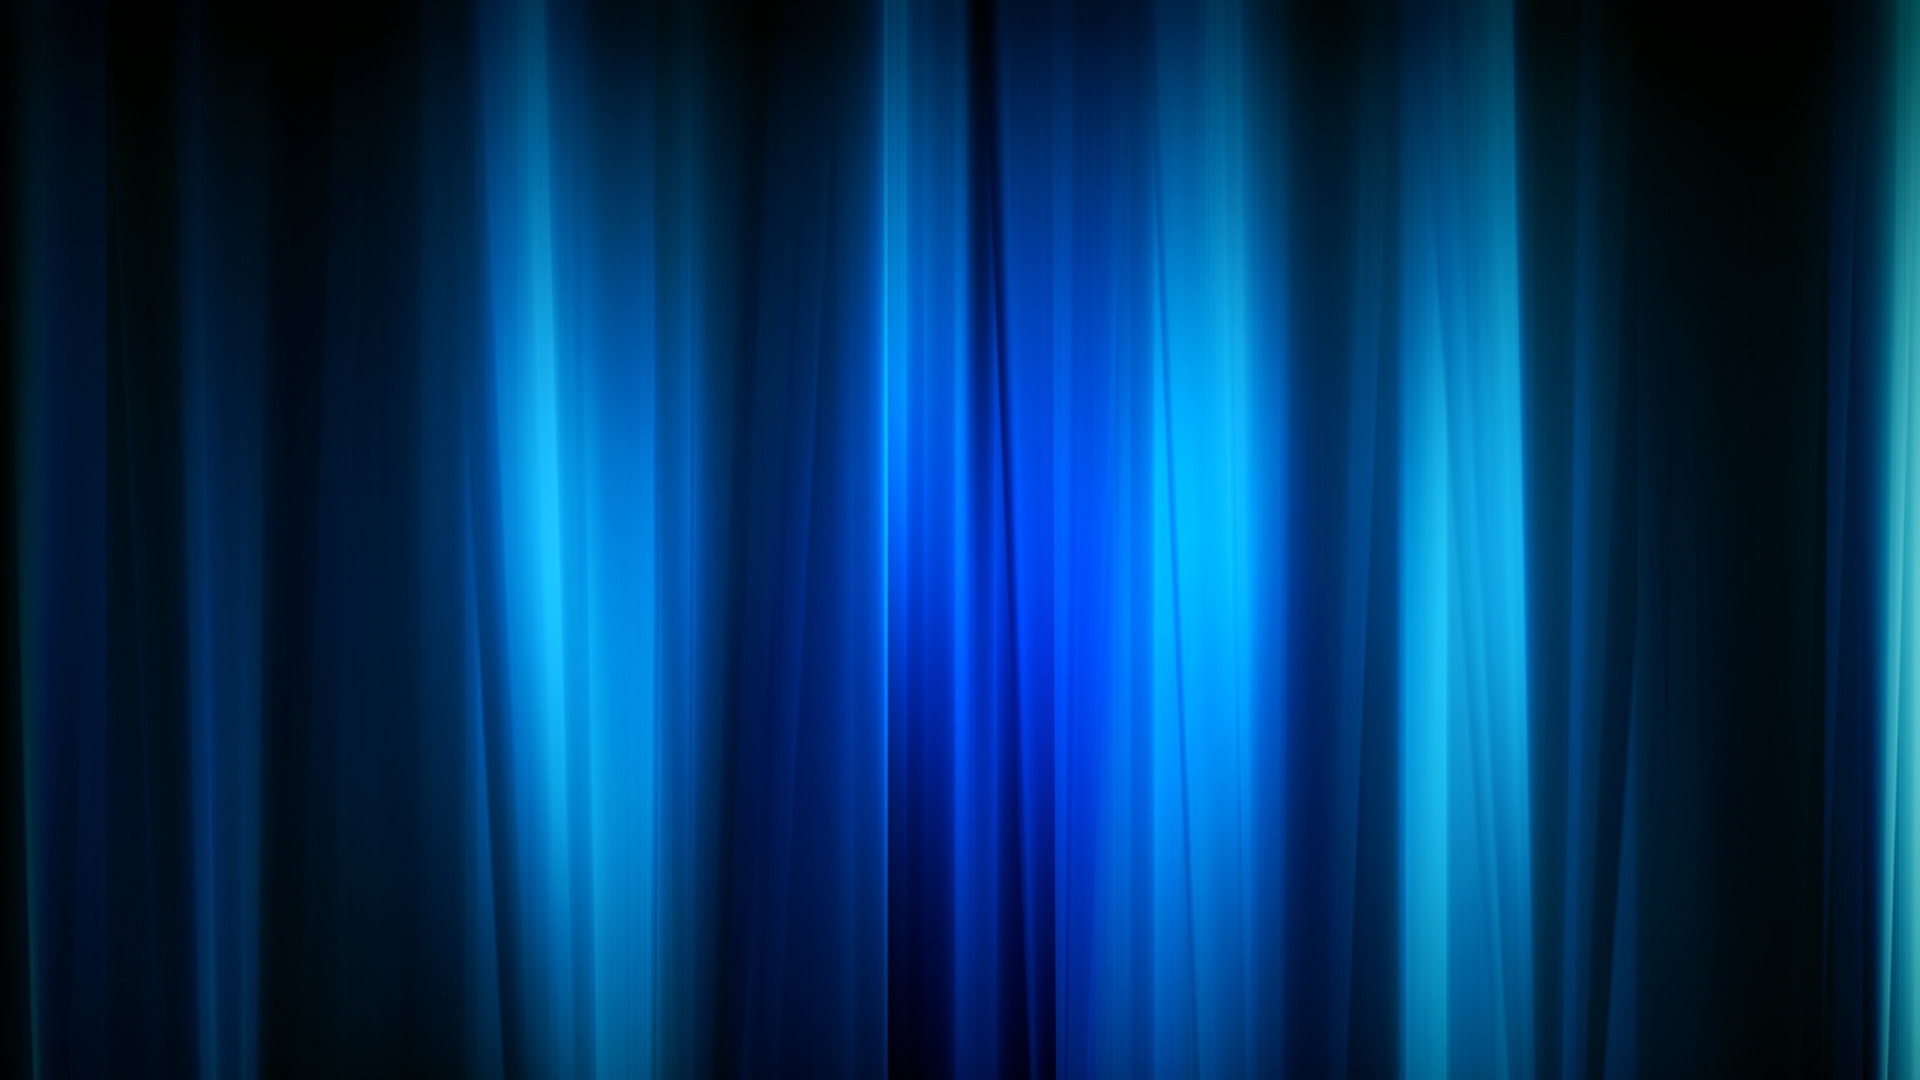 Blue Color HD Wallpaper - Wallpaper, High Definition, High Quality